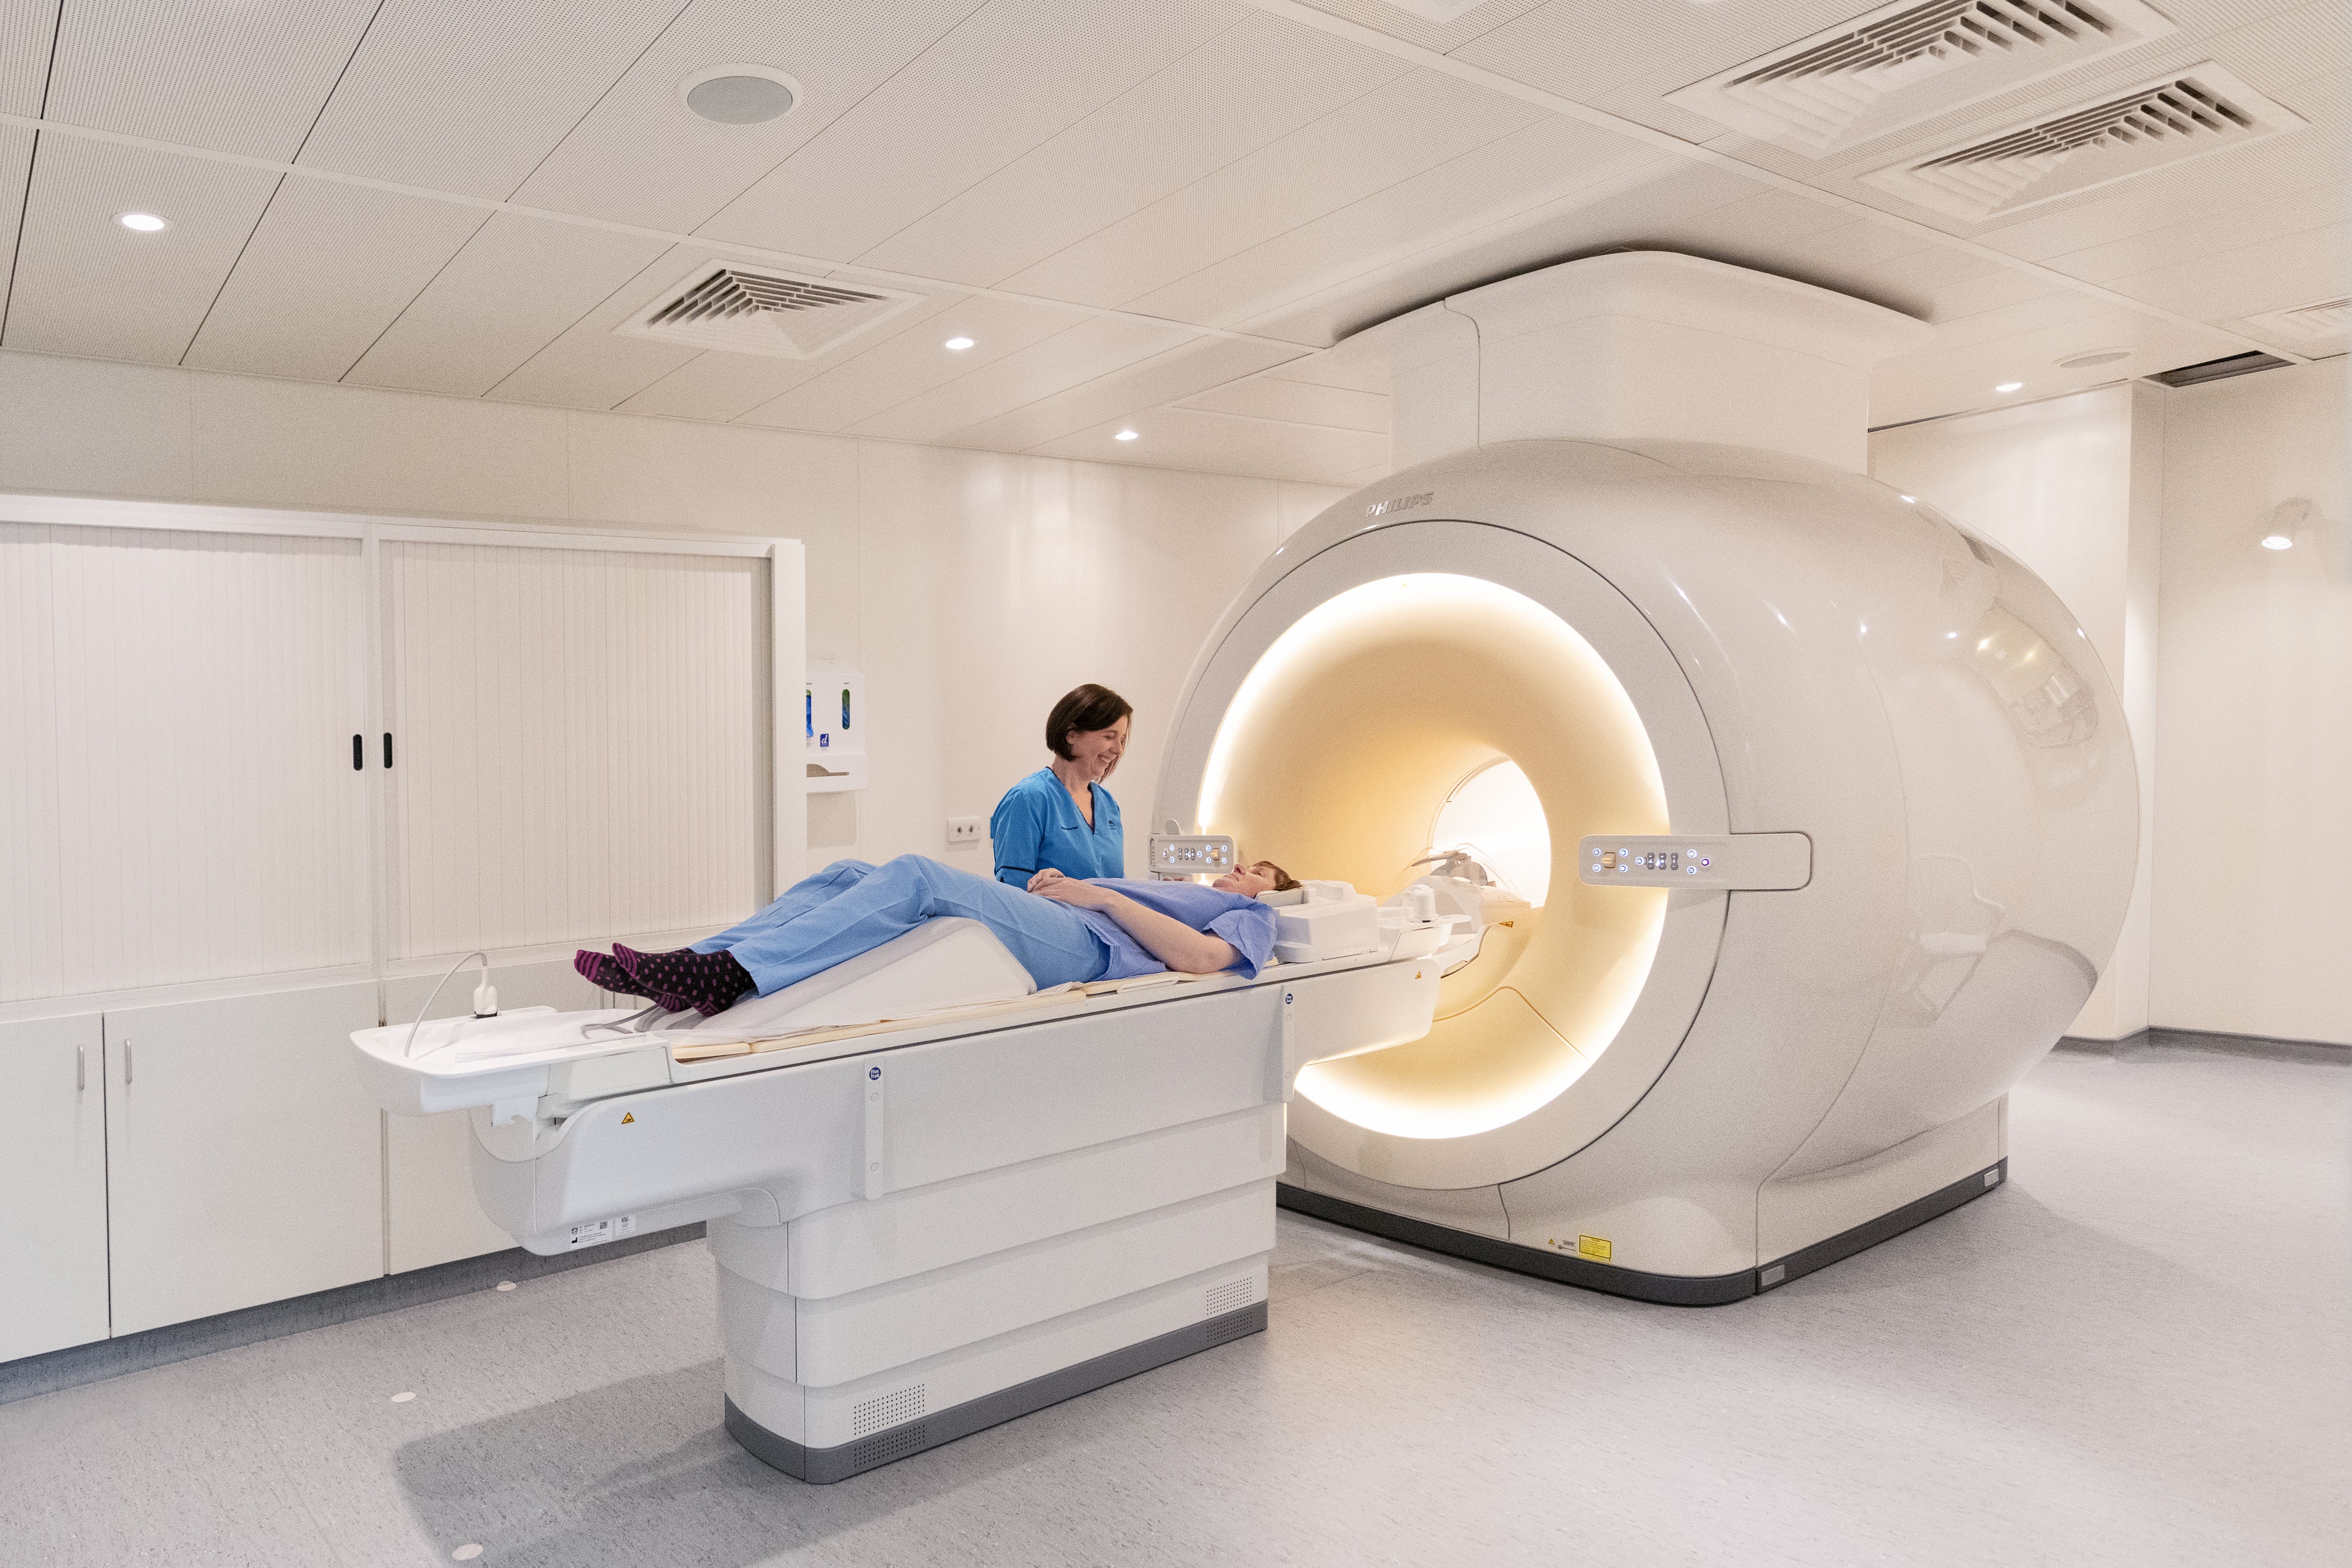 Combining ultrasound and MRI technology helped detect prostate cancers more quickly (University of Aberdeen/PA)